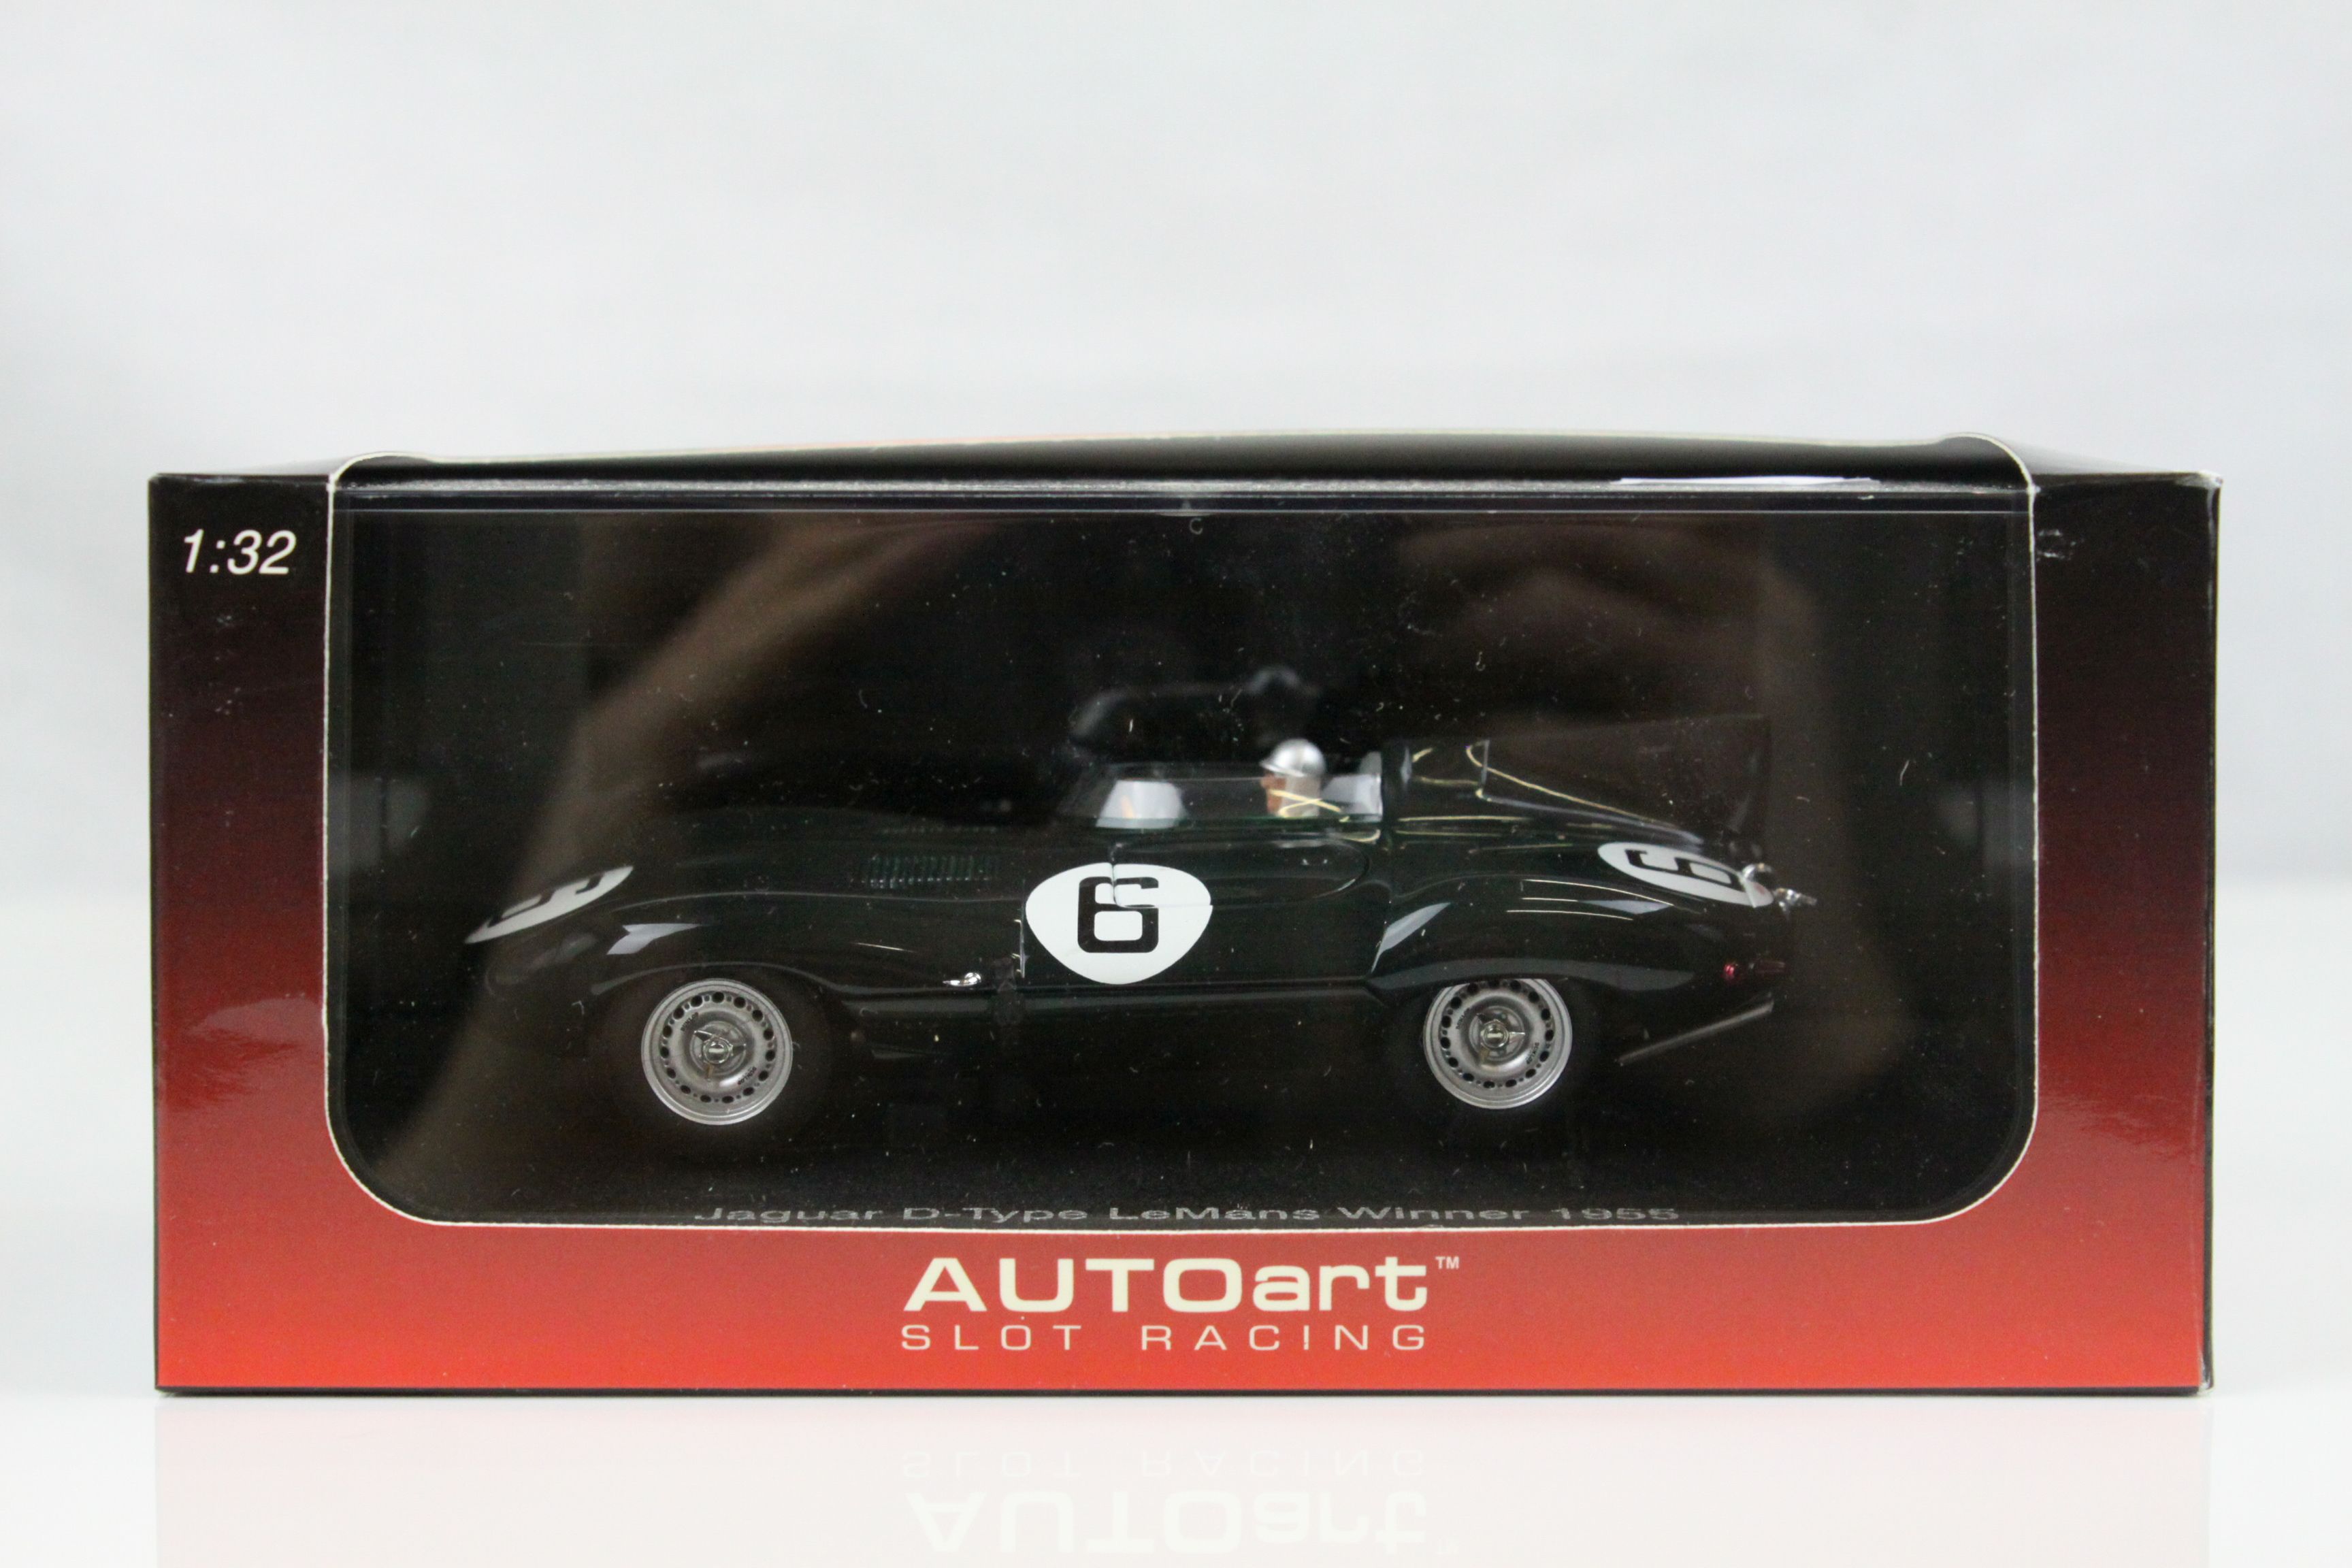 Four cased slot cars to include 3 x Auto Art Slot Racing featuring 13032 Mazda RX-8 (Velocity - Image 26 of 35